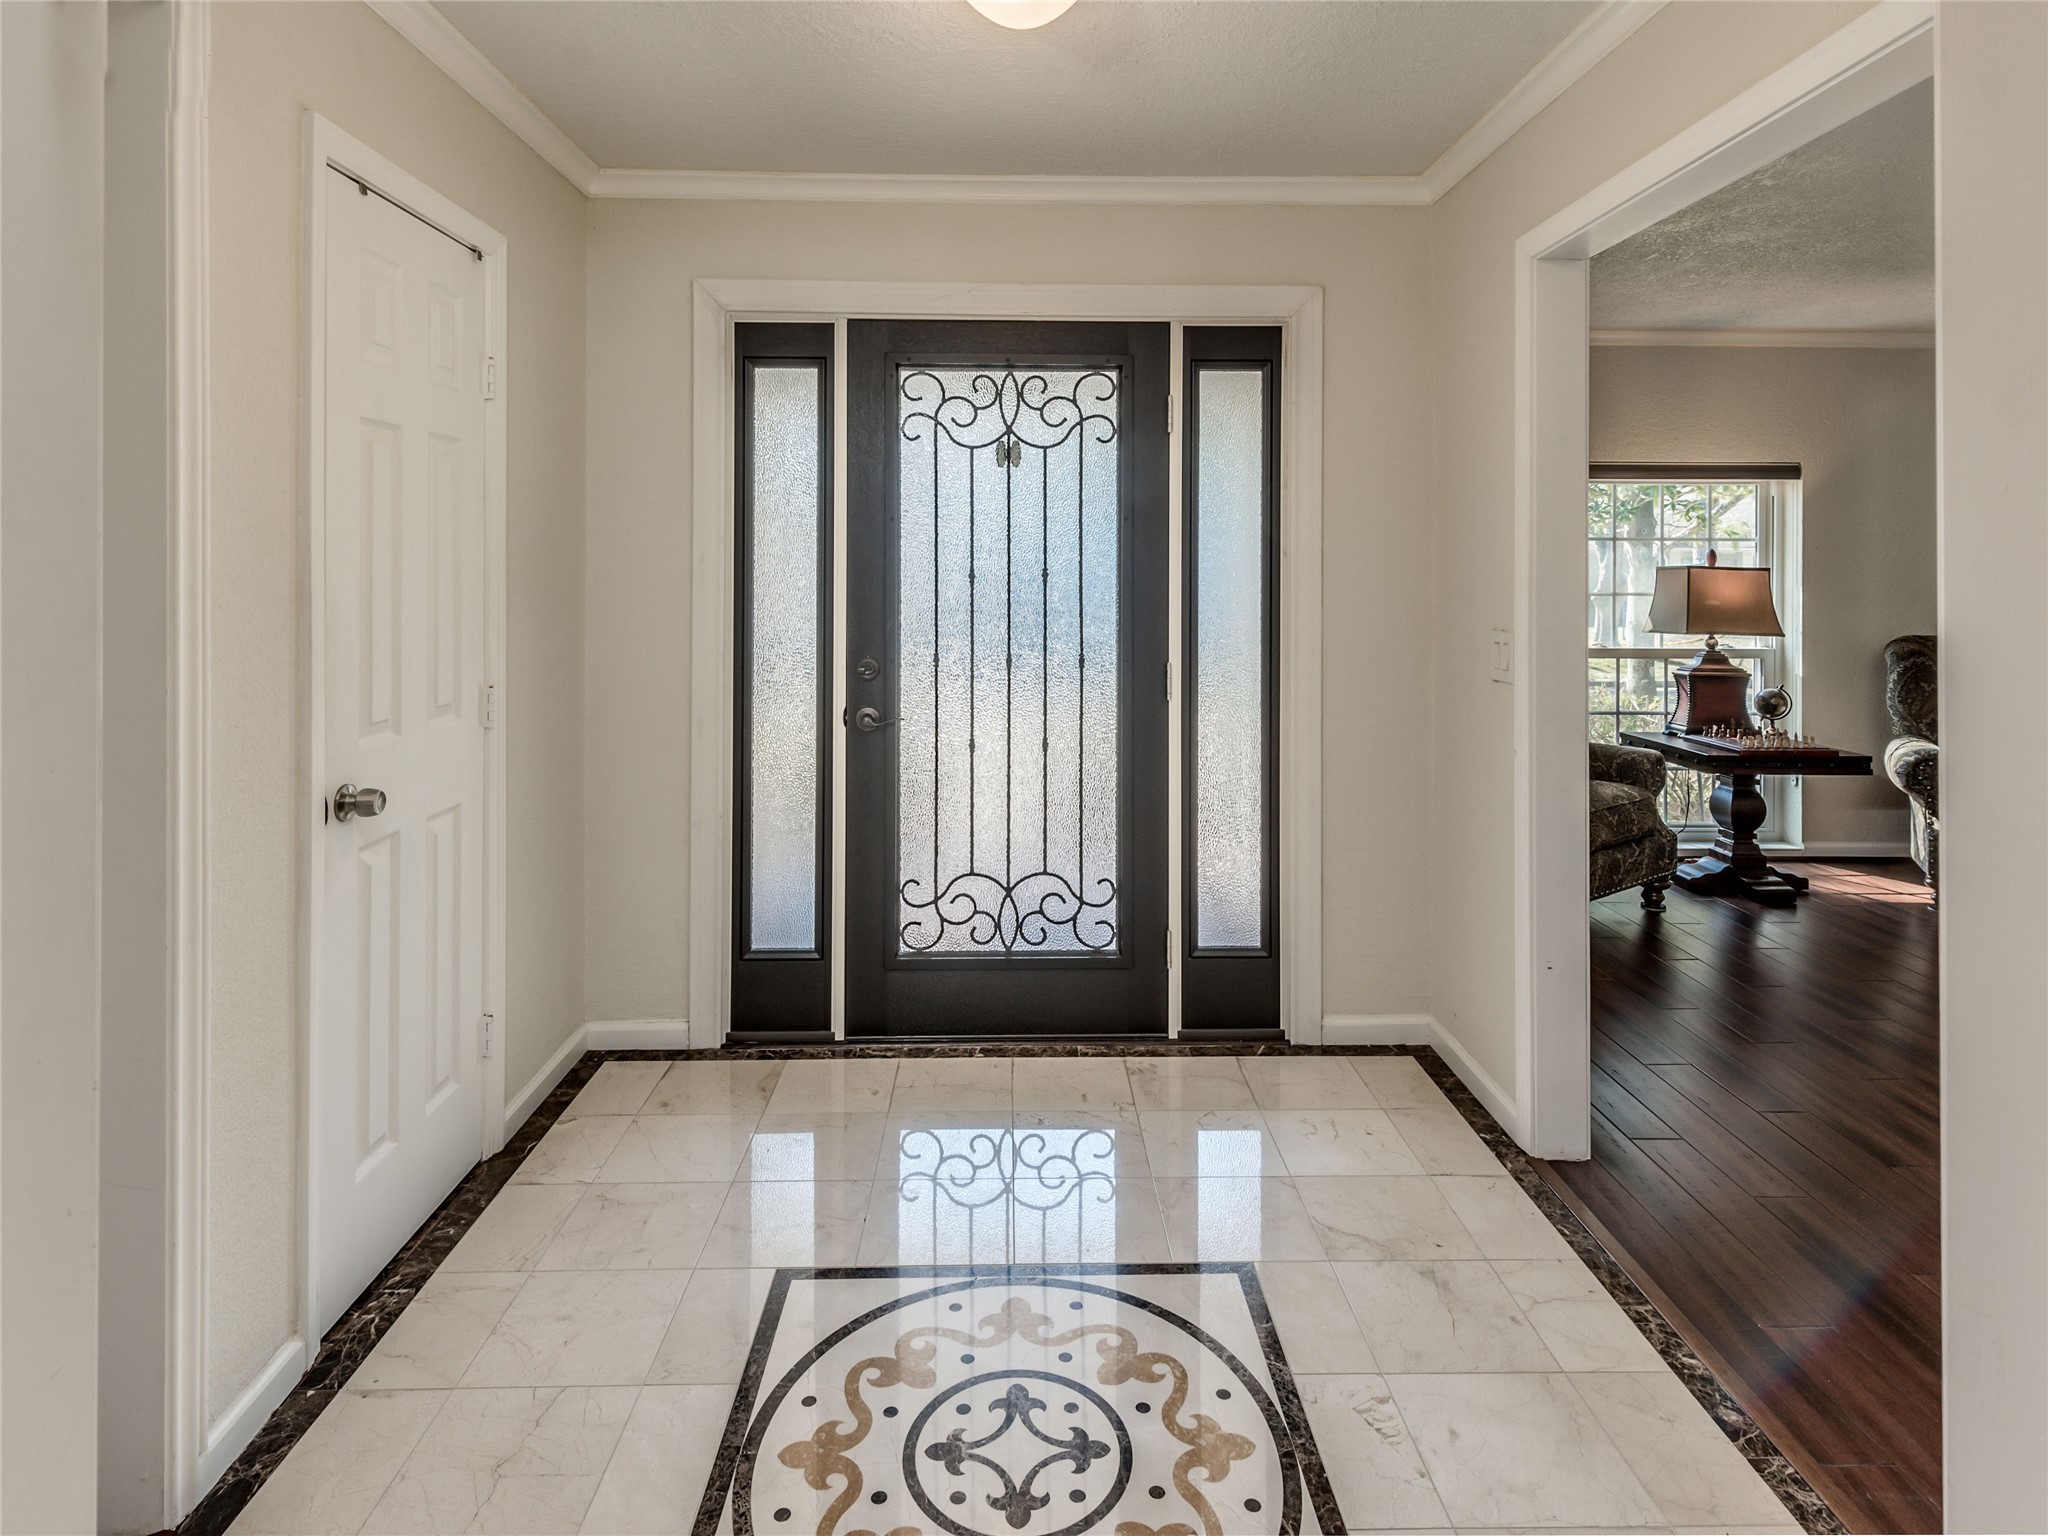 Gorgeous marble tile floors with elegant decorative inlay greet guests as they enter this beautiful home.